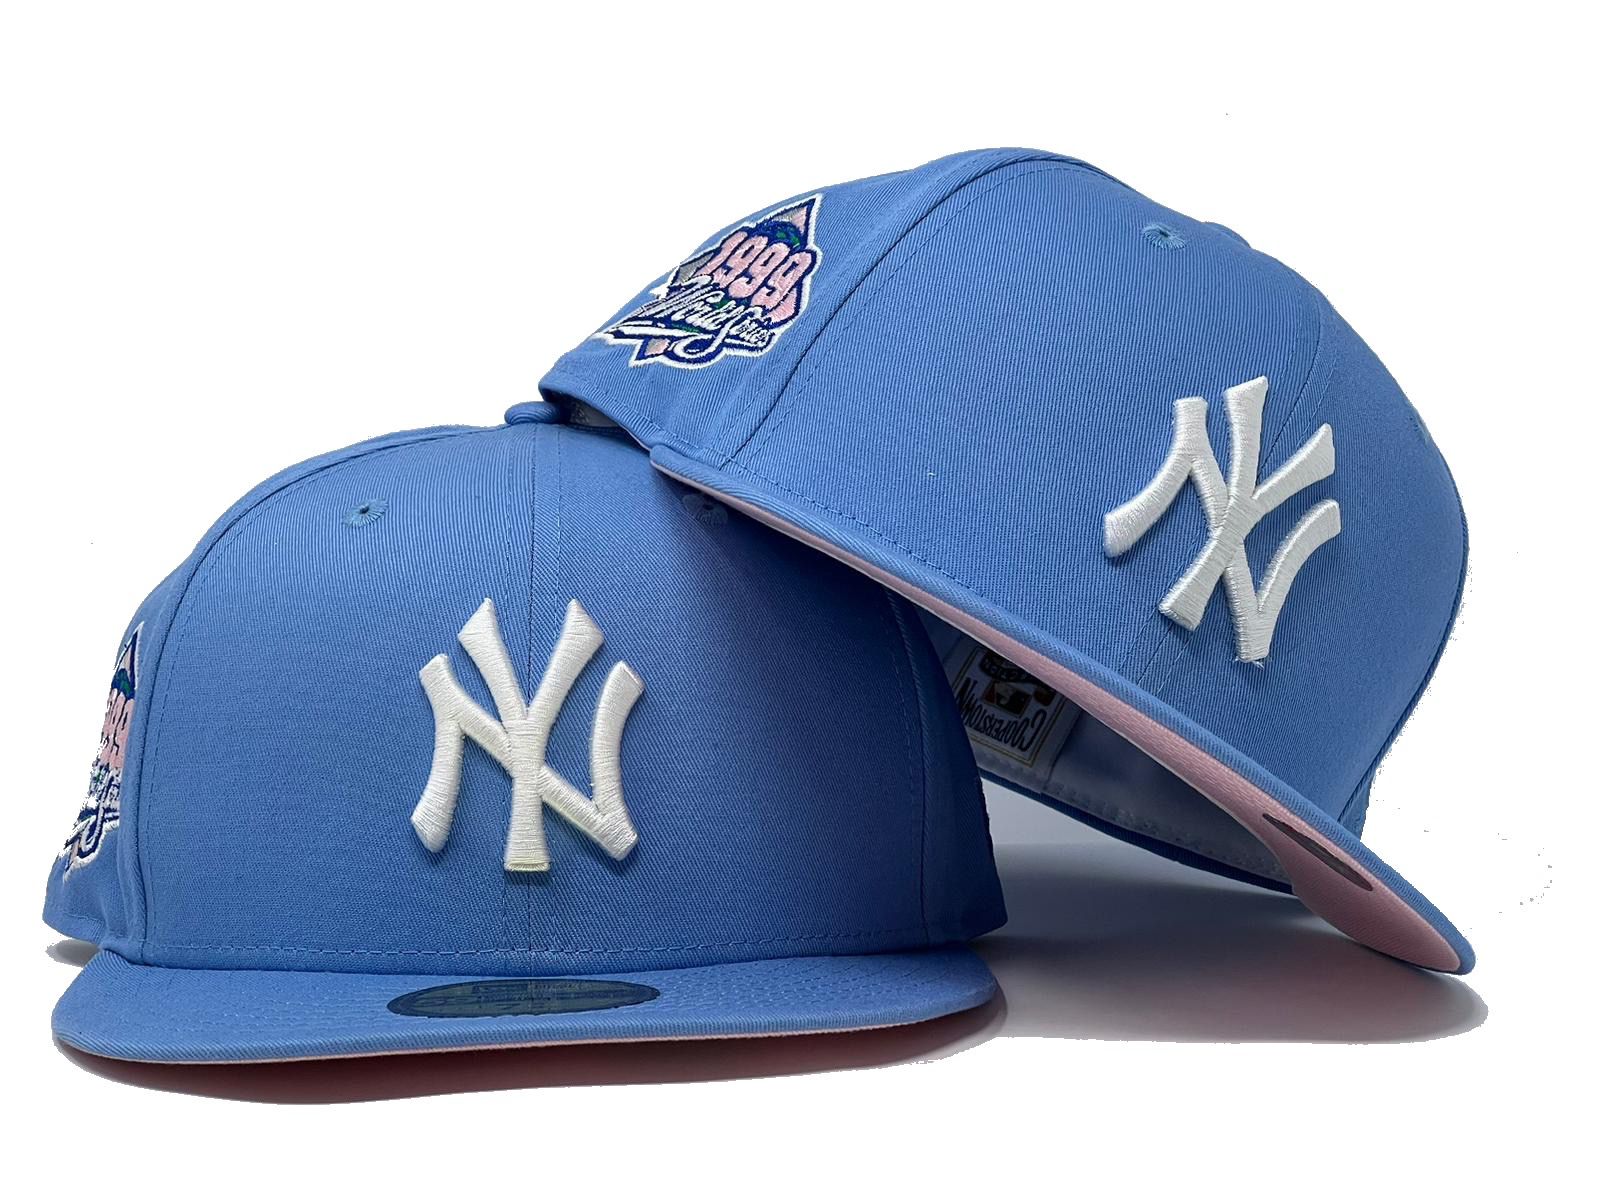 sky blue fitted hat